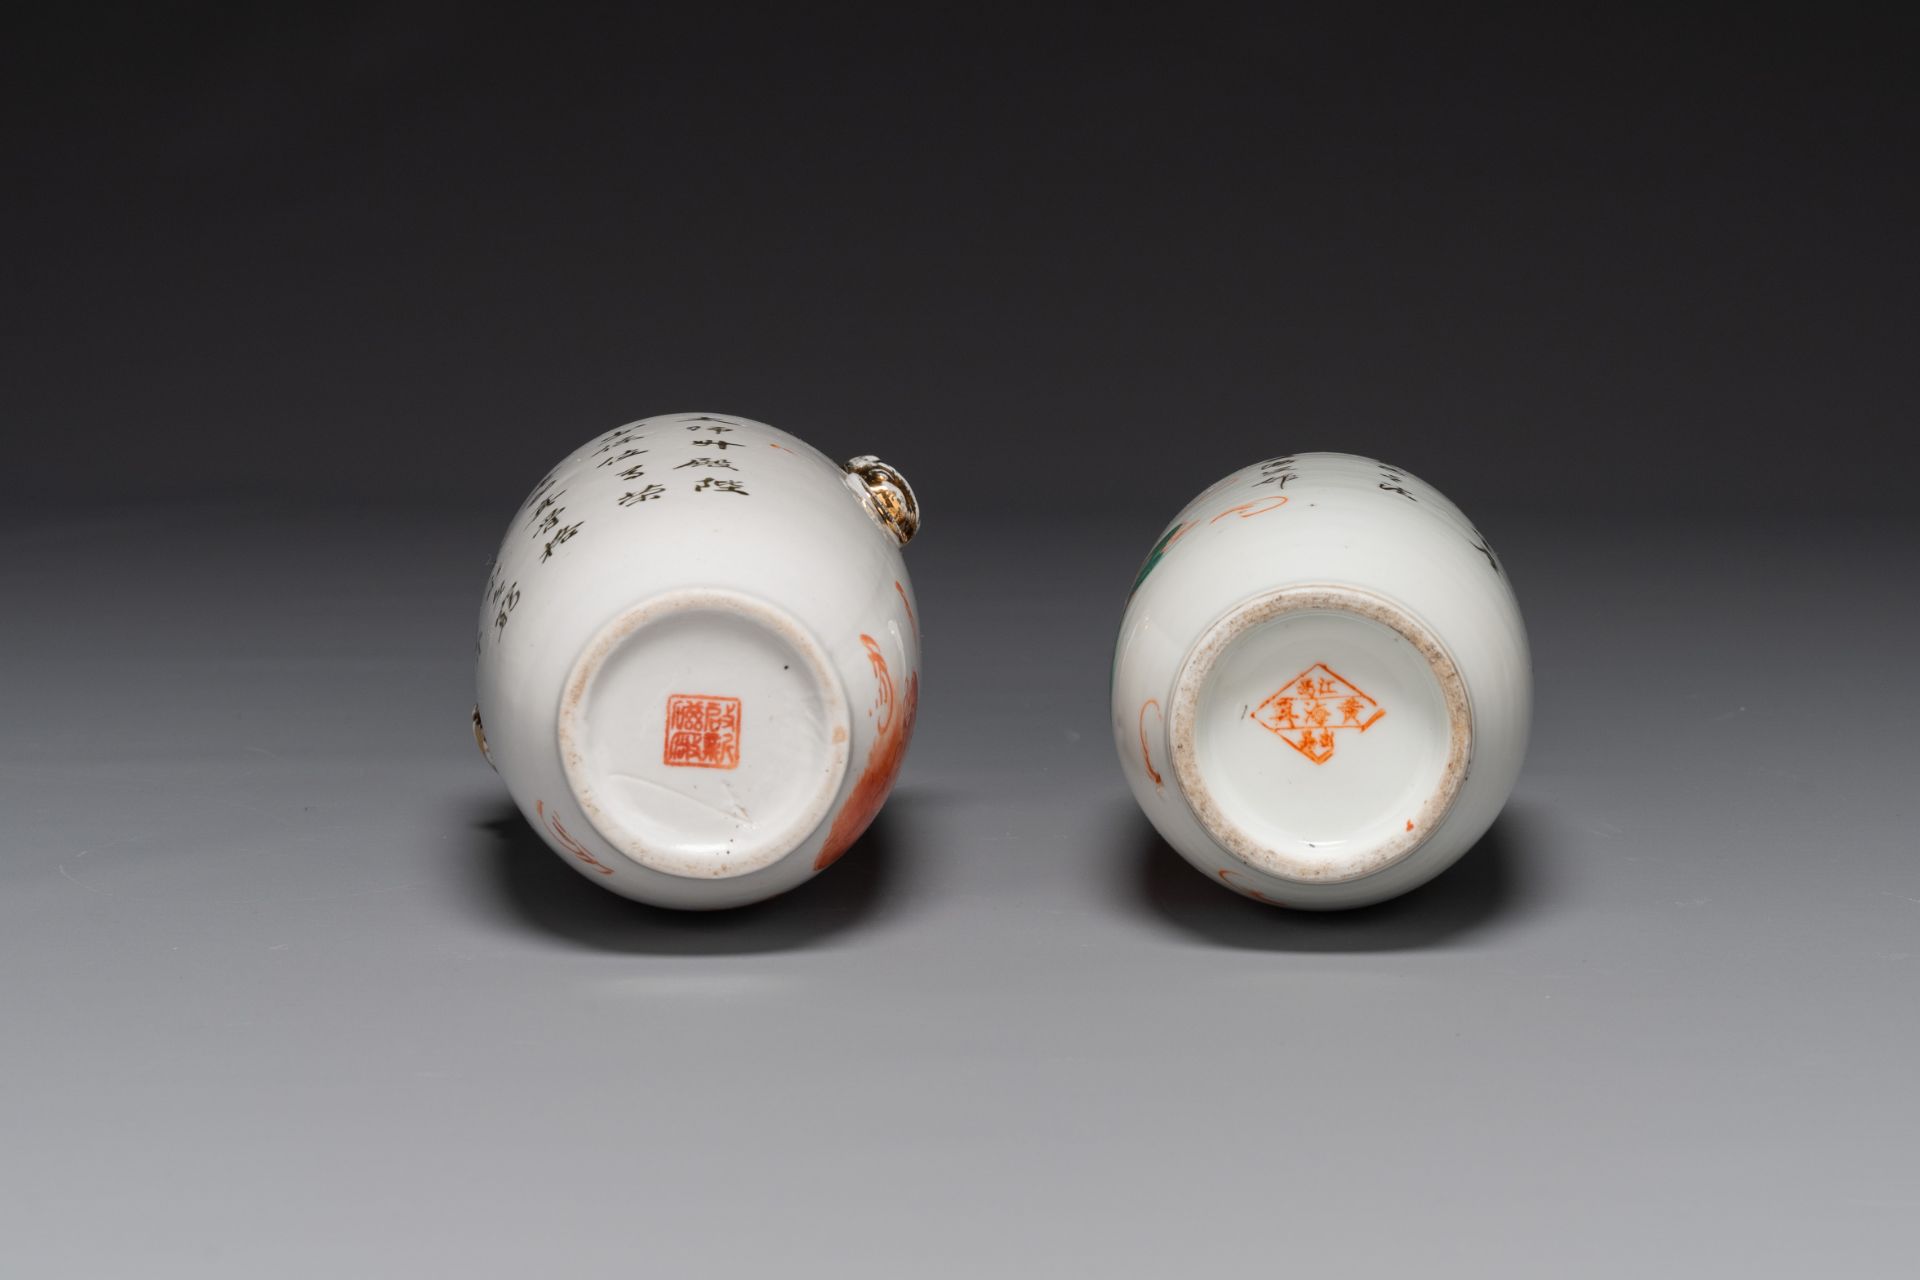 A varied collection of Chinese qianjiang cai and iron-red-decorated porcelain, signed Liu Shuntai åŠ - Image 6 of 6